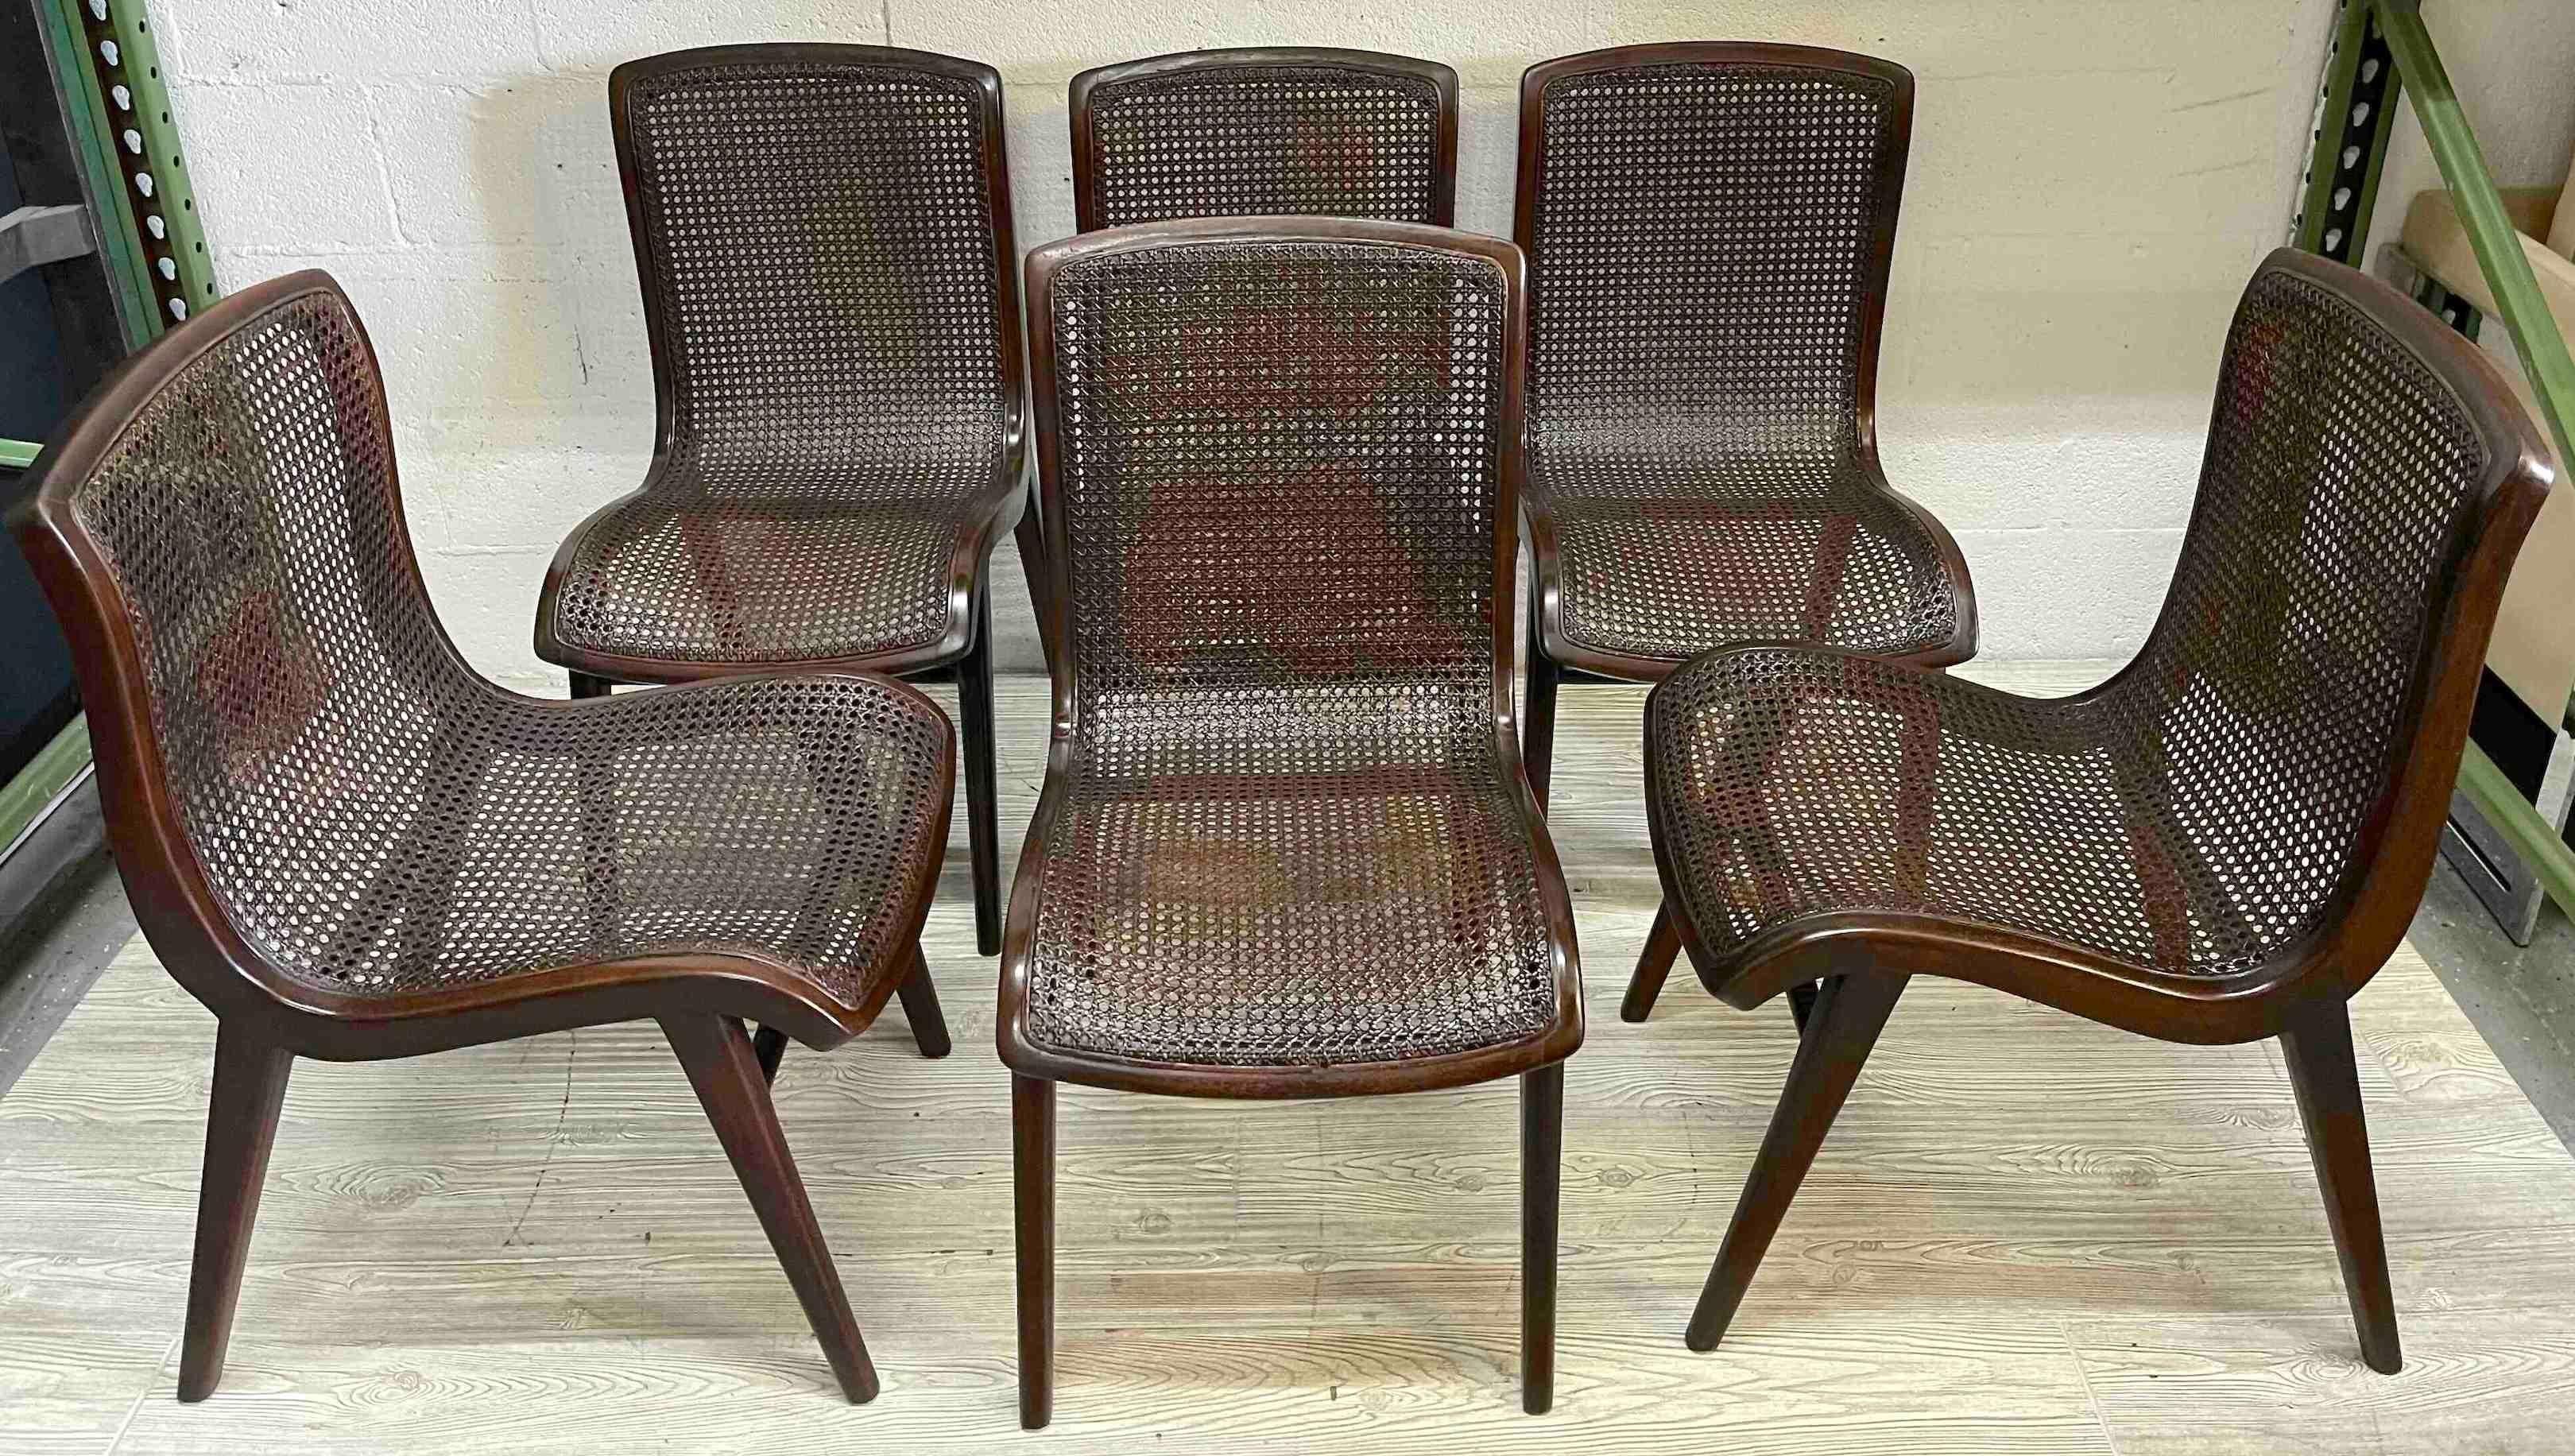 Six Sleek French Modern Cantilever Woven Cane Dining Chairs
France, circa 1950s 

A set of six elegant French Modern cantilever-woven cane dining chairs exudes sophistication and timeless style. Each chair, measuring 33.5 inches high by 17 inches